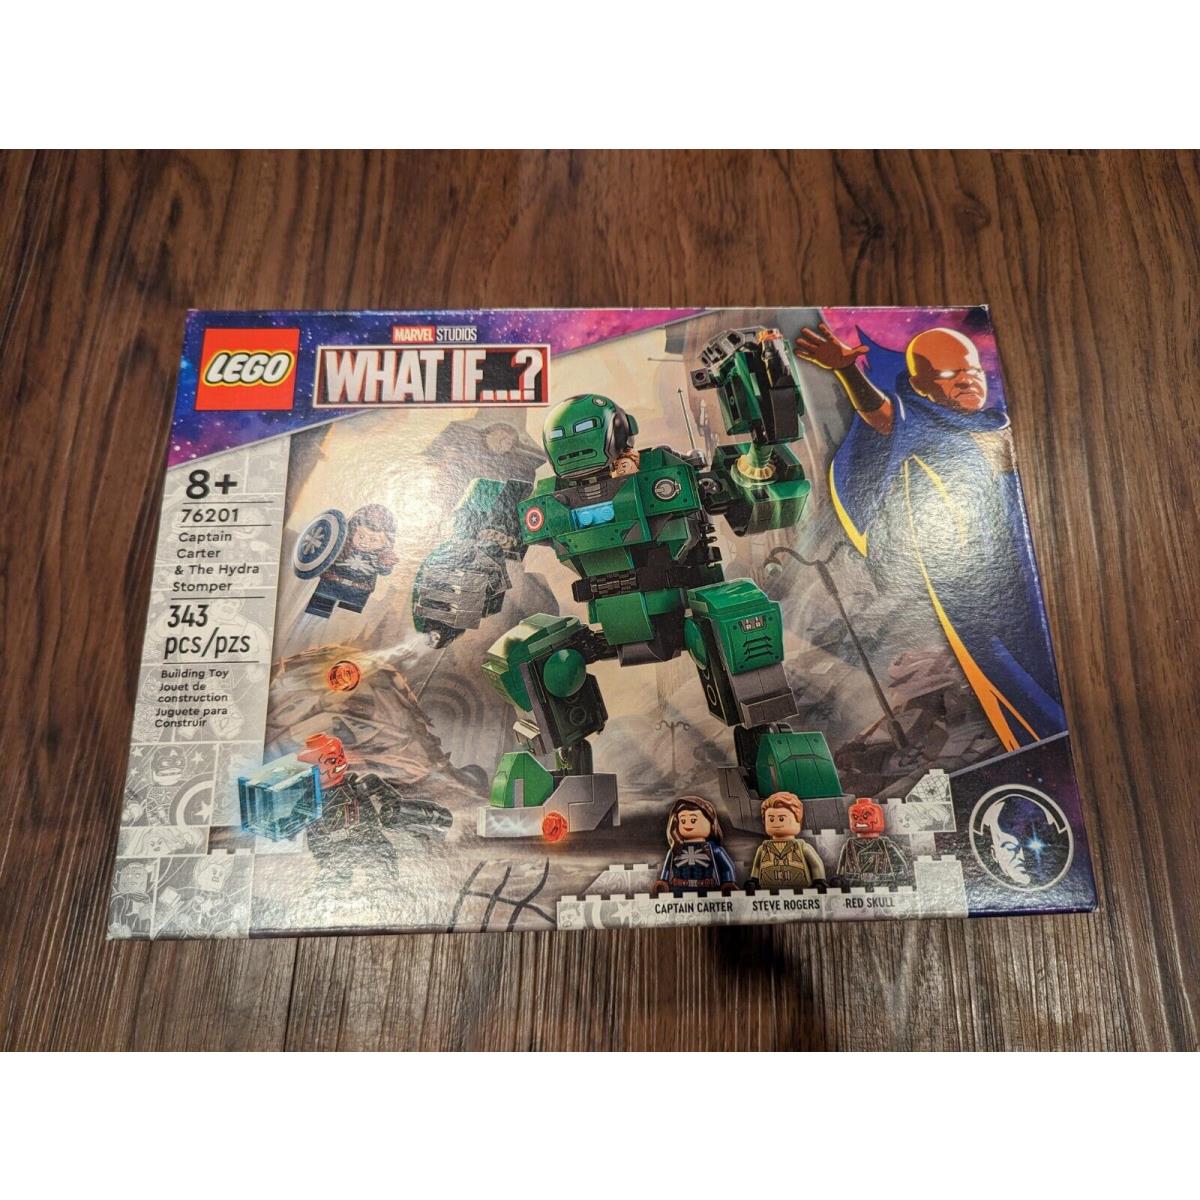 Lego Marvel What If Captain Carter Hydra Stomper 76201 Playset